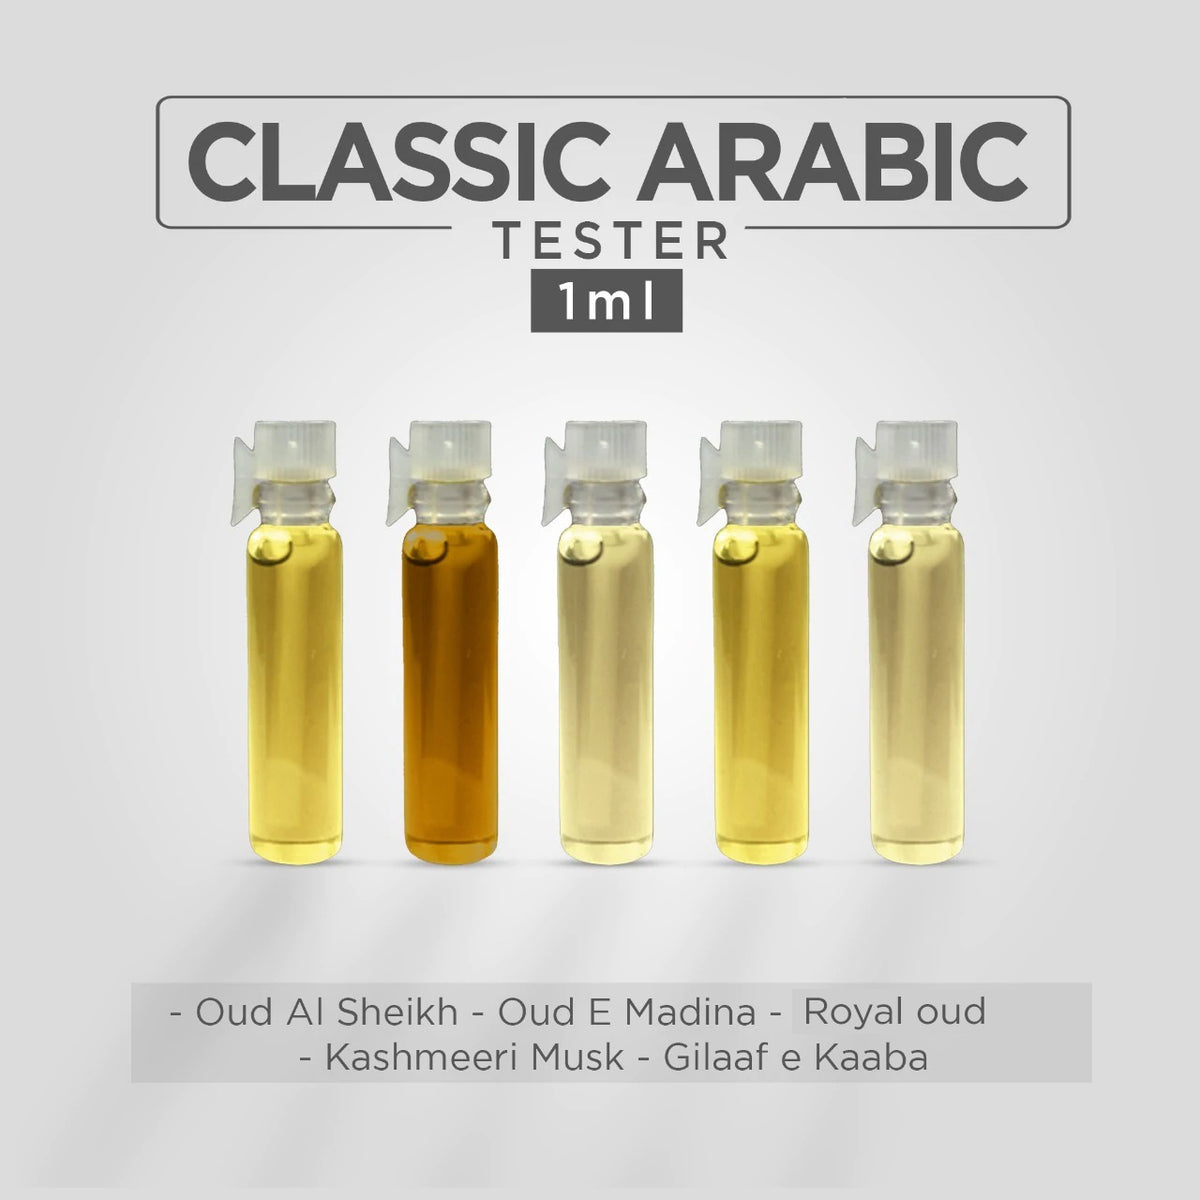 Pack of 5 Arabic oil testers